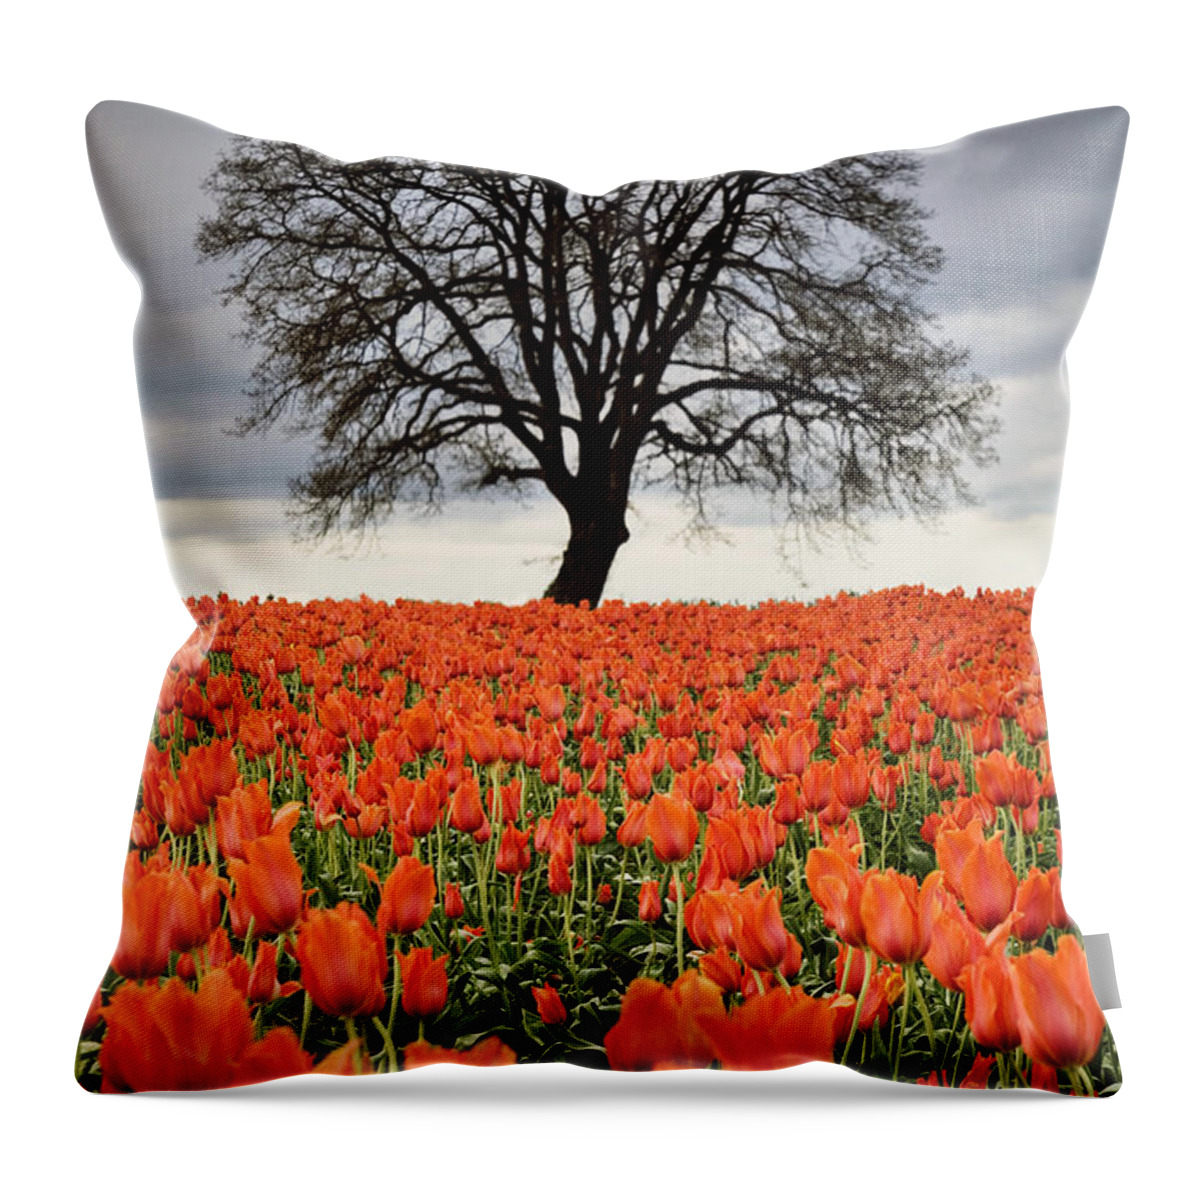 Tulips Throw Pillow featuring the photograph Tulips And Tree, Or #1 by Sean Bagshaw